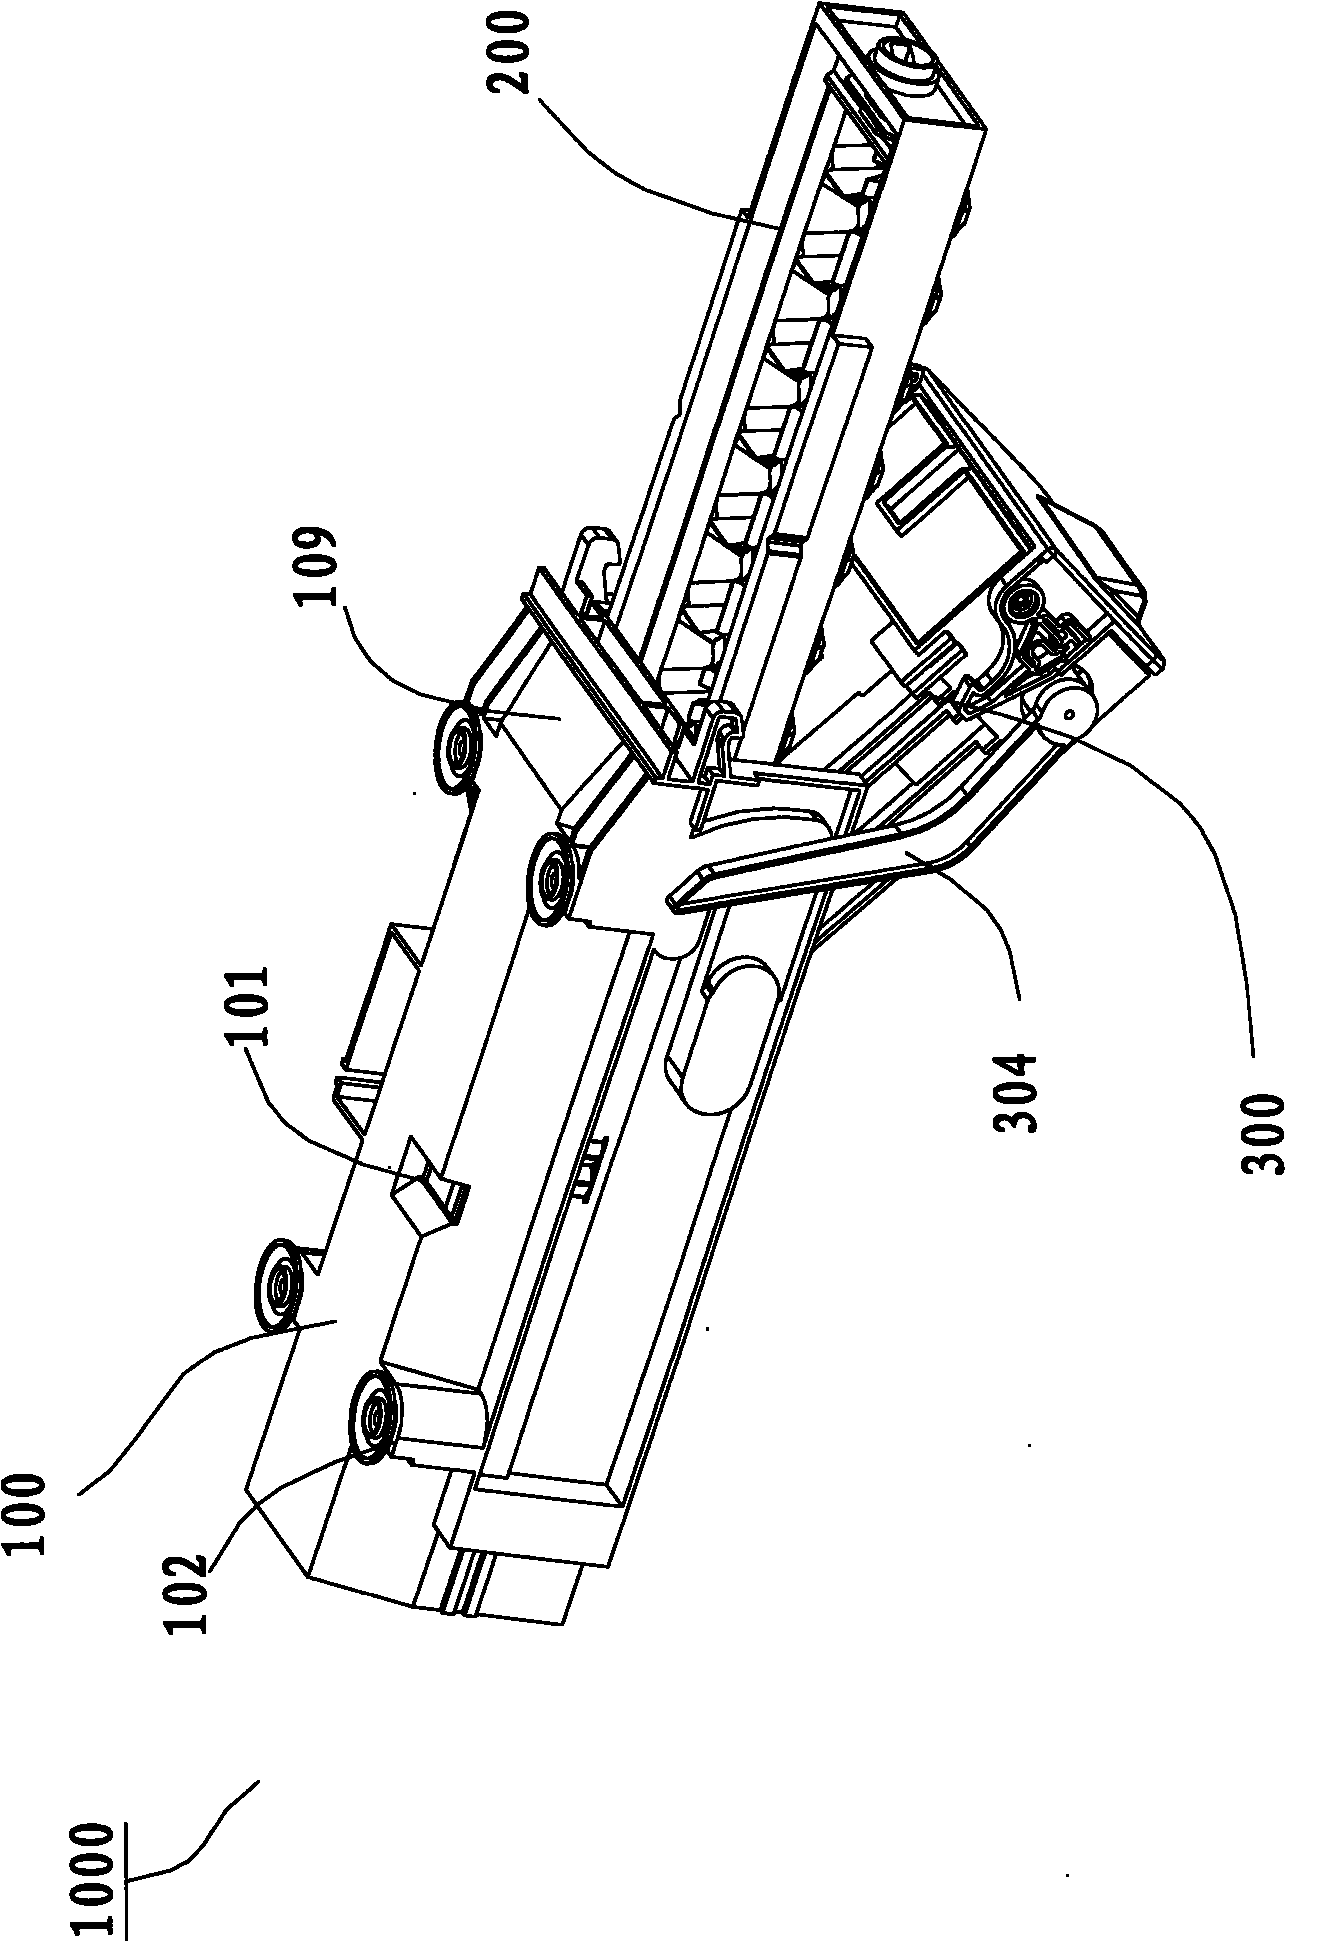 Ice-making motor assembly and automatic ice machine